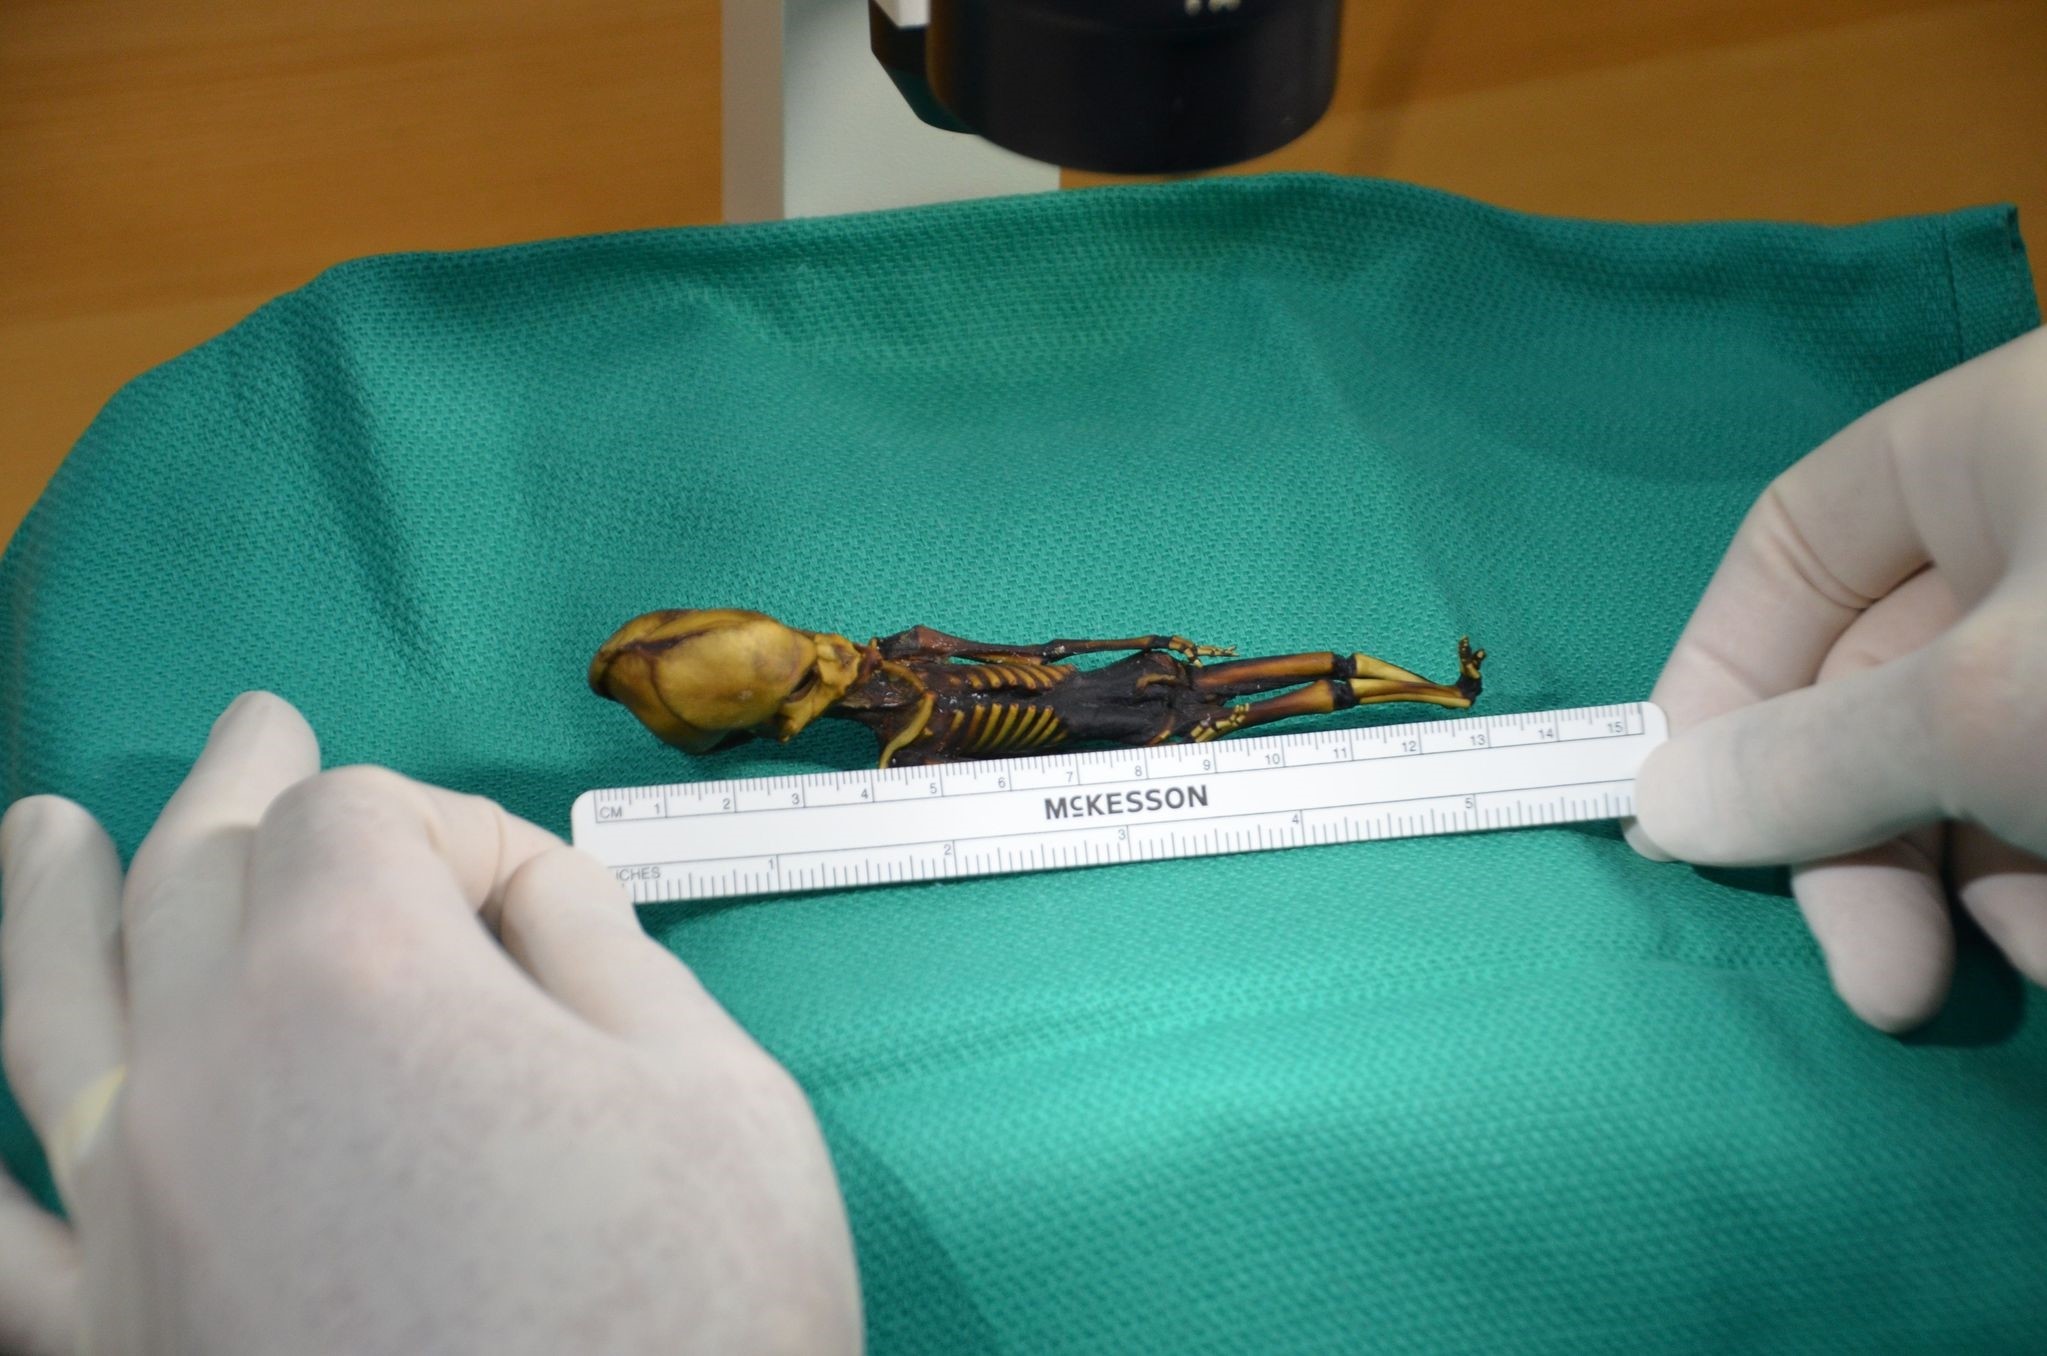  This undated image courtesy of  Dr. Emery Smith show a tiny, mummified skeleton discovery in 2003 in Chile's Atacama Desert, tucked into a leather pouch behind a church. (AFP Photo)